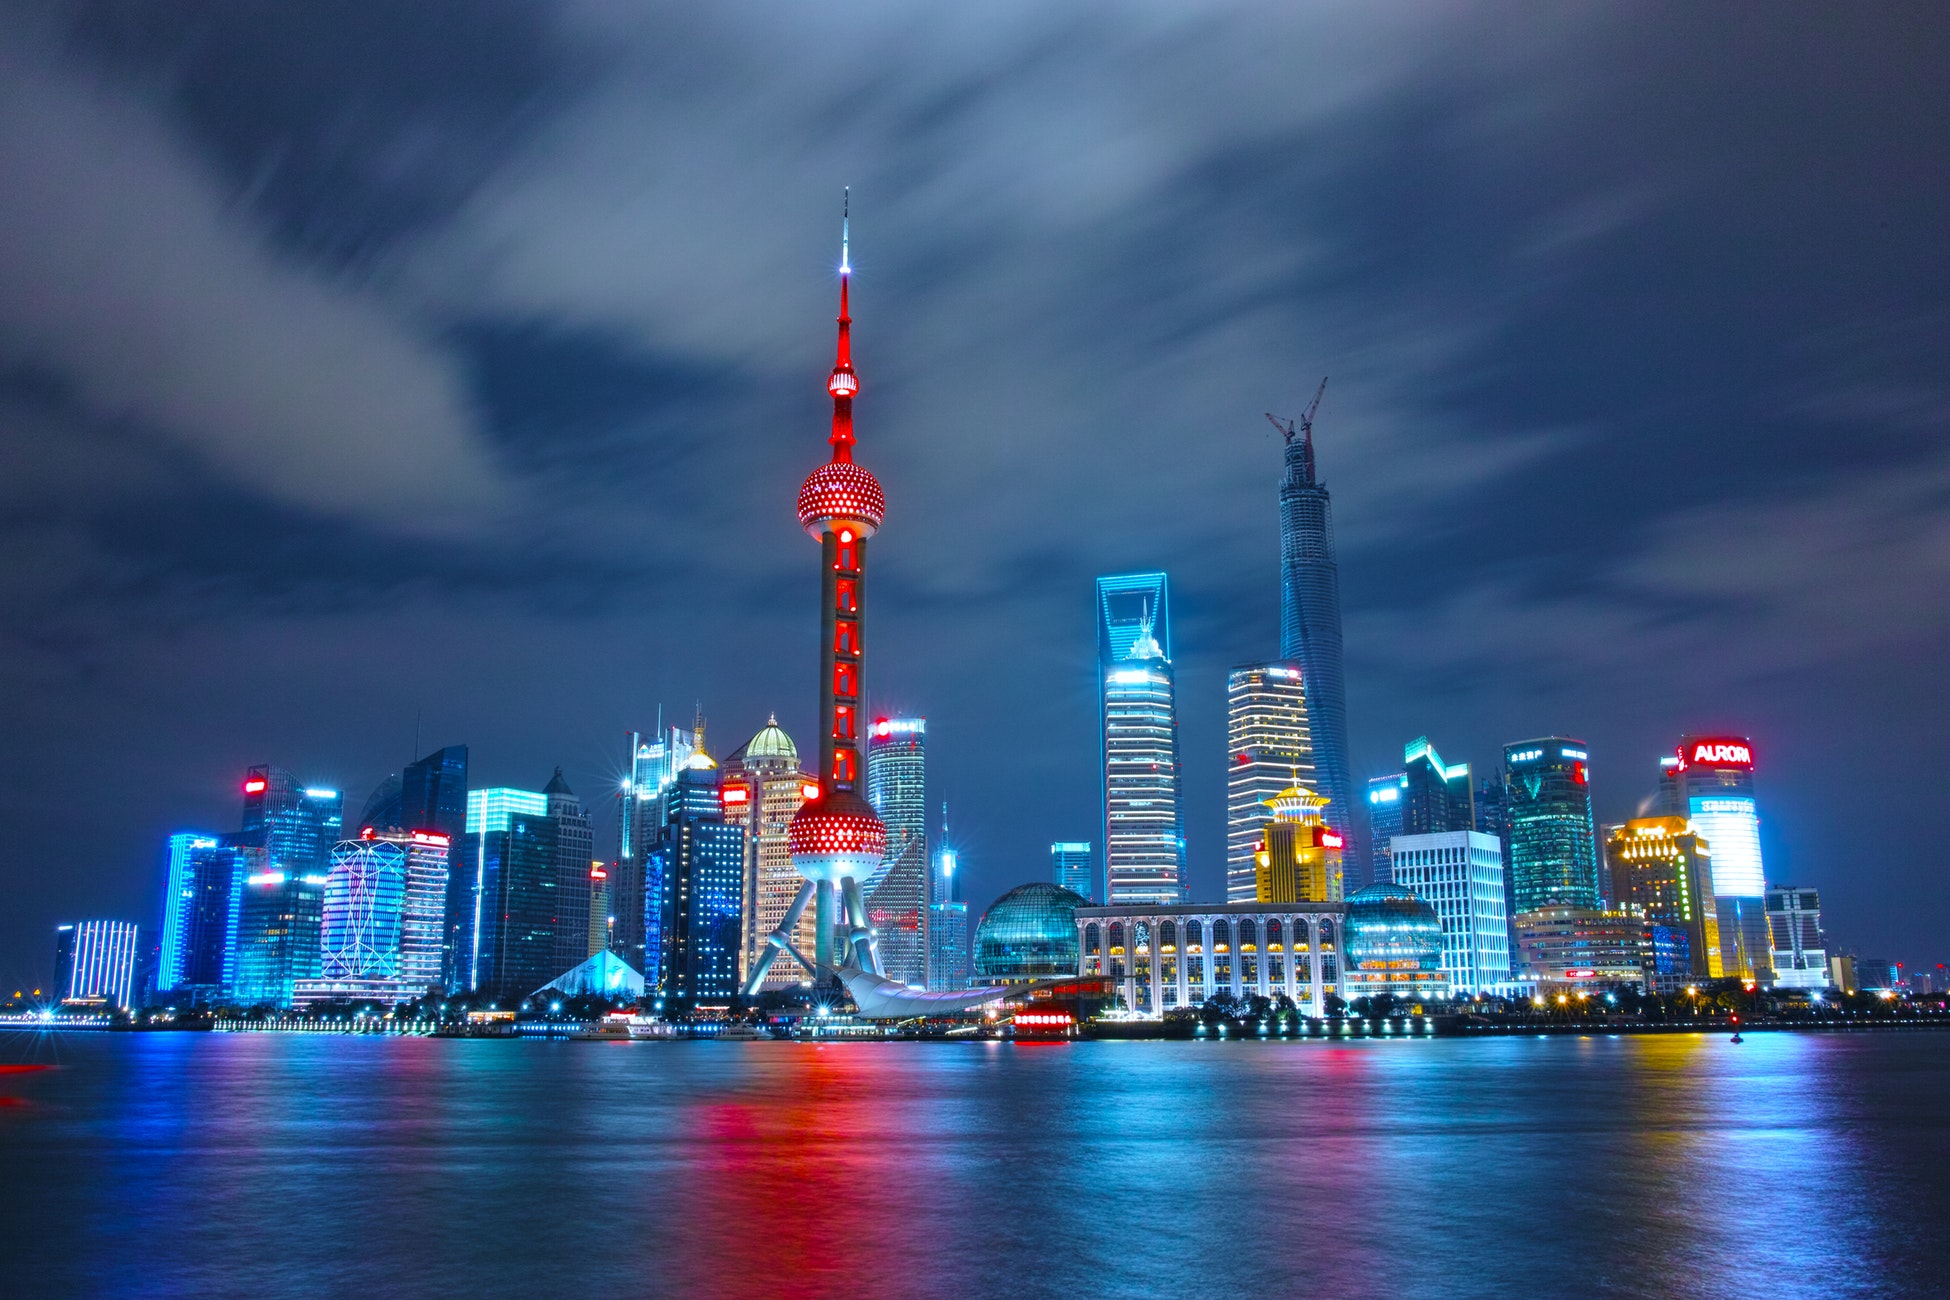 Photo of Shanghai, China and caption that UHWO is offering Chinese language classes for the first time this spring